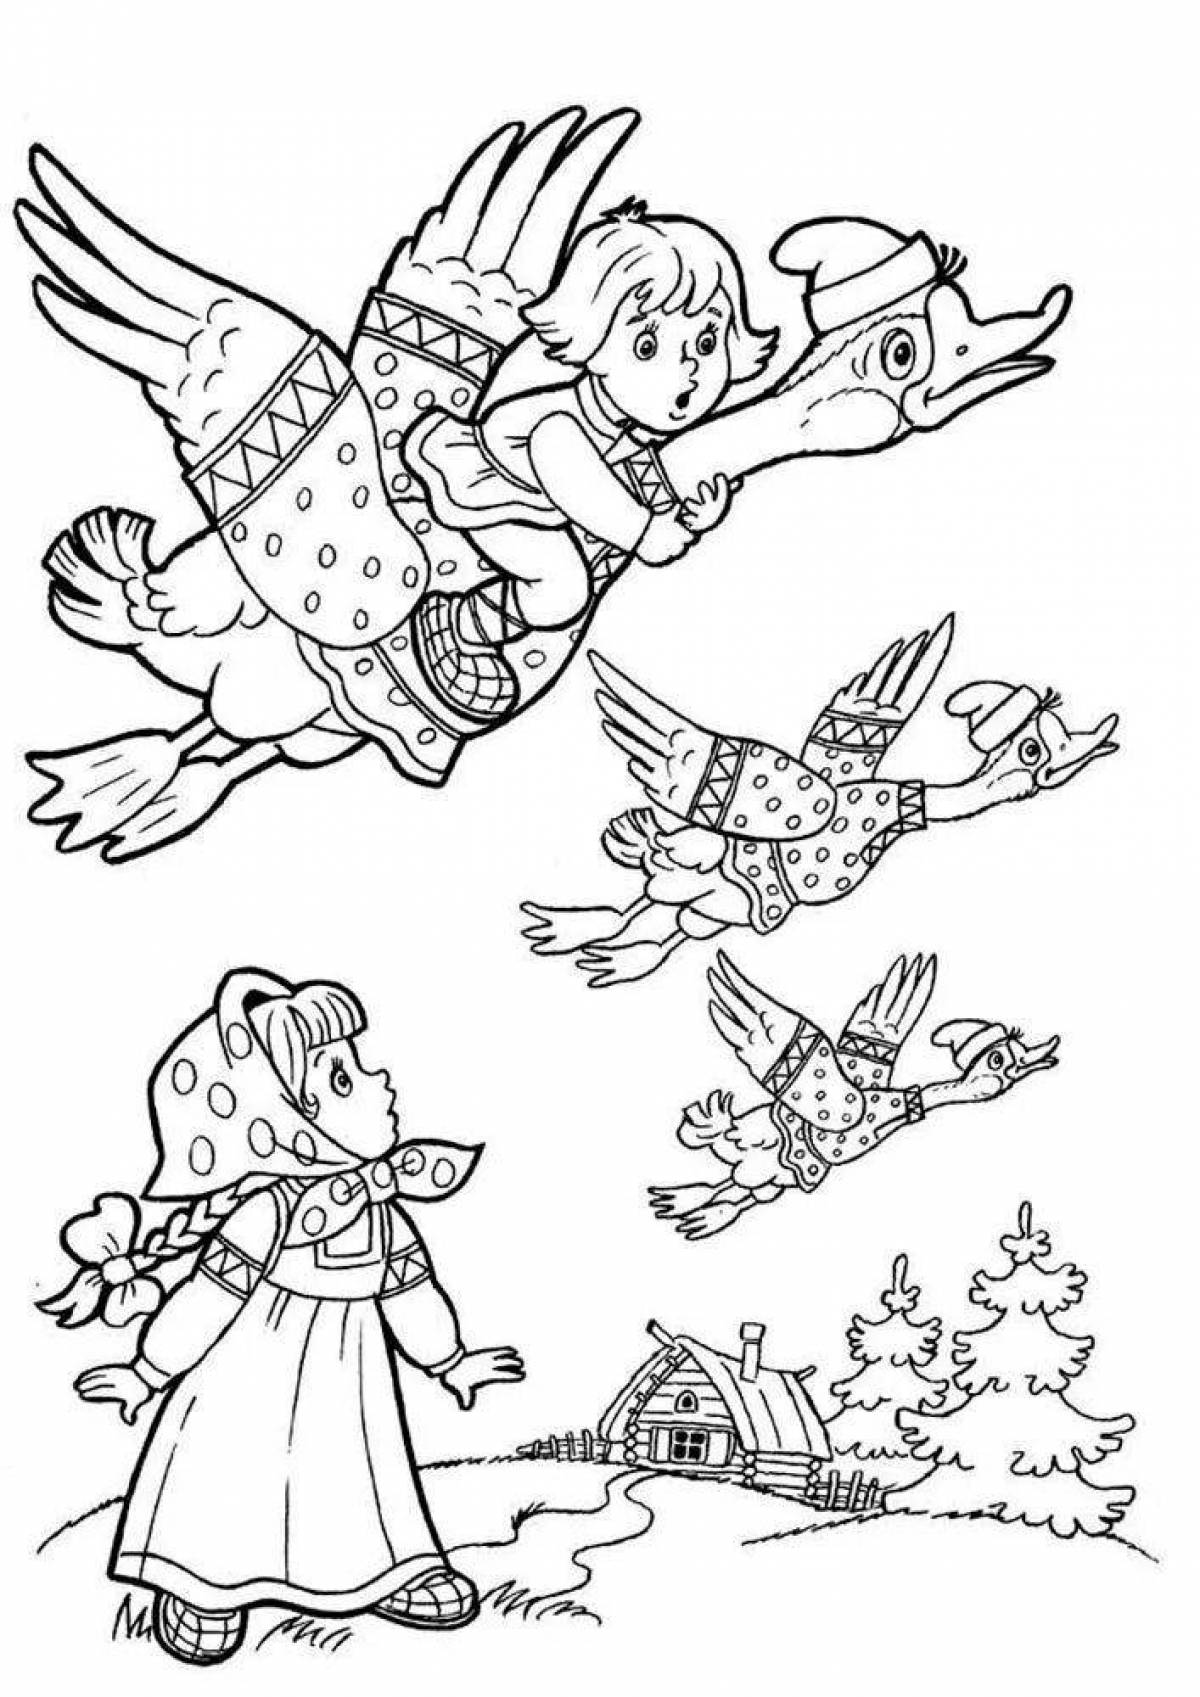 Glorious swan geese coloring page